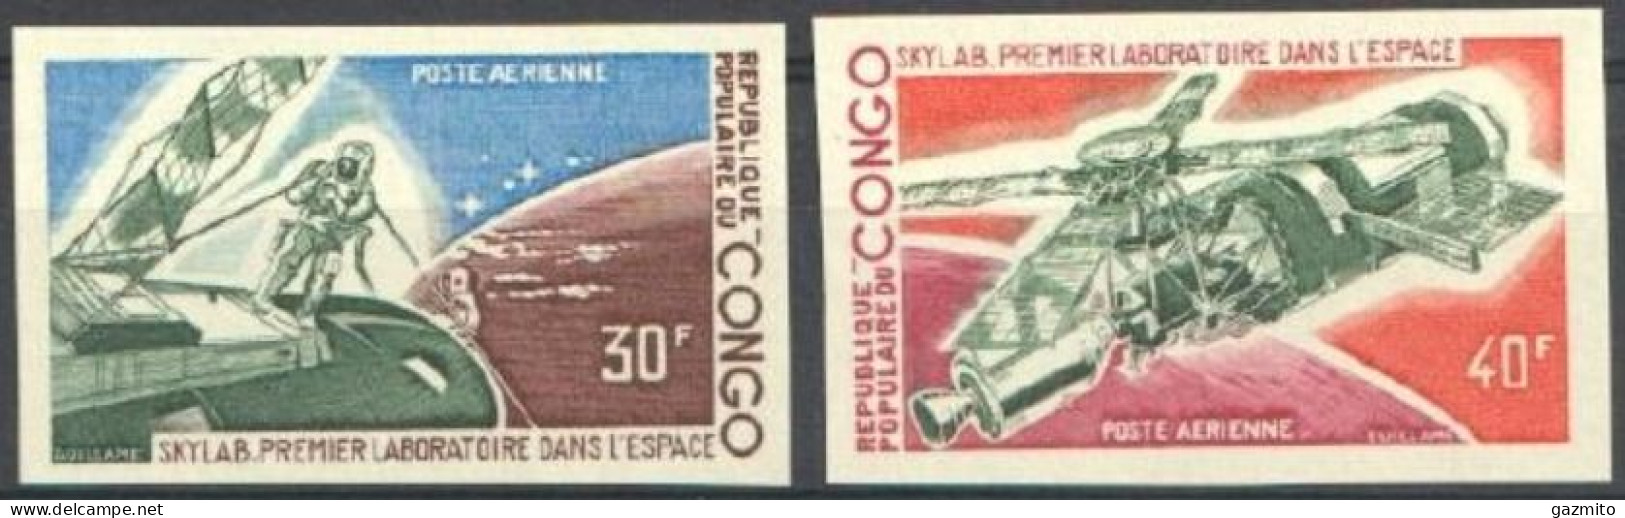 Congo Brazaville 1973, Airmail - Skylab Space Laboratory, 2val IMPERFORATED - Mint/hinged